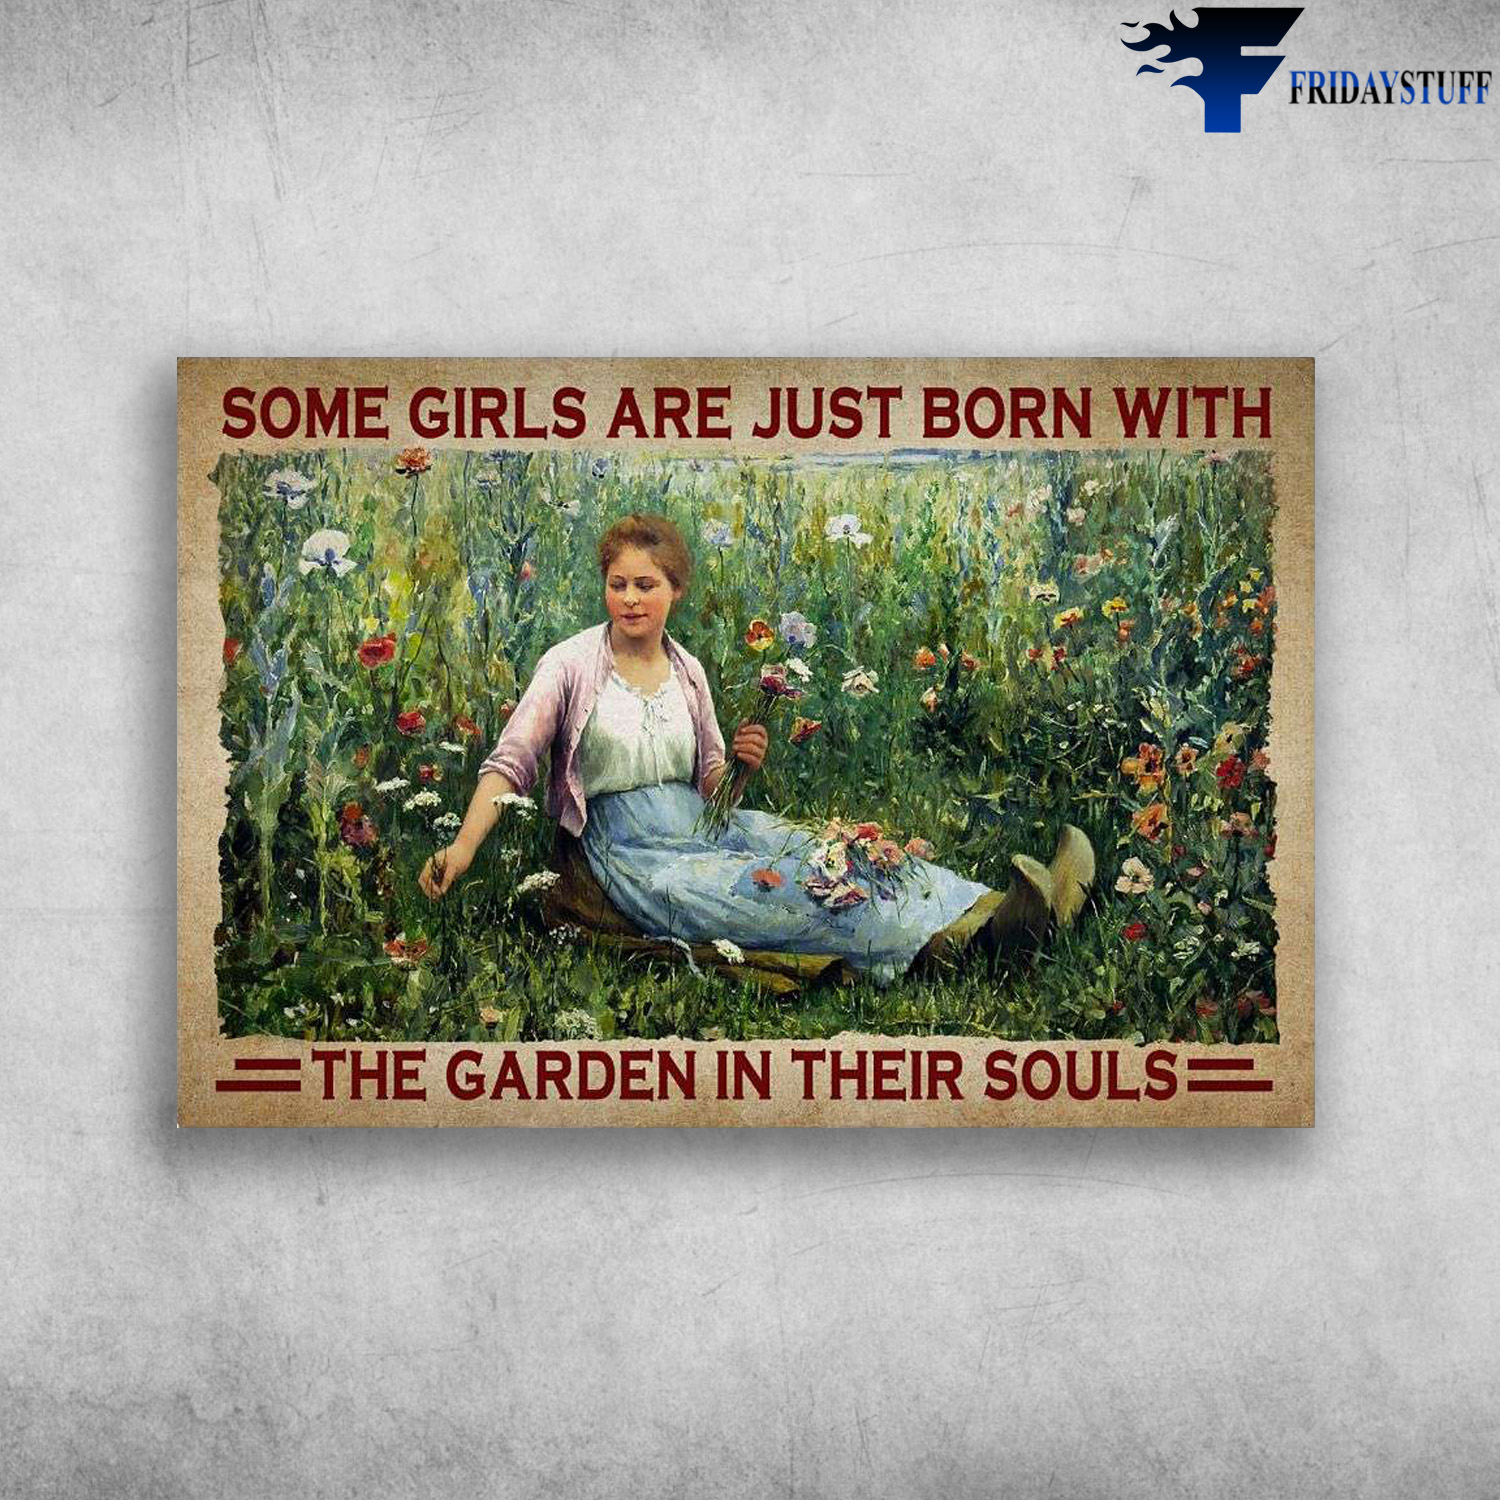 Gardening Girl - Some Girls Are Just Born With, The Garden In Their Souls